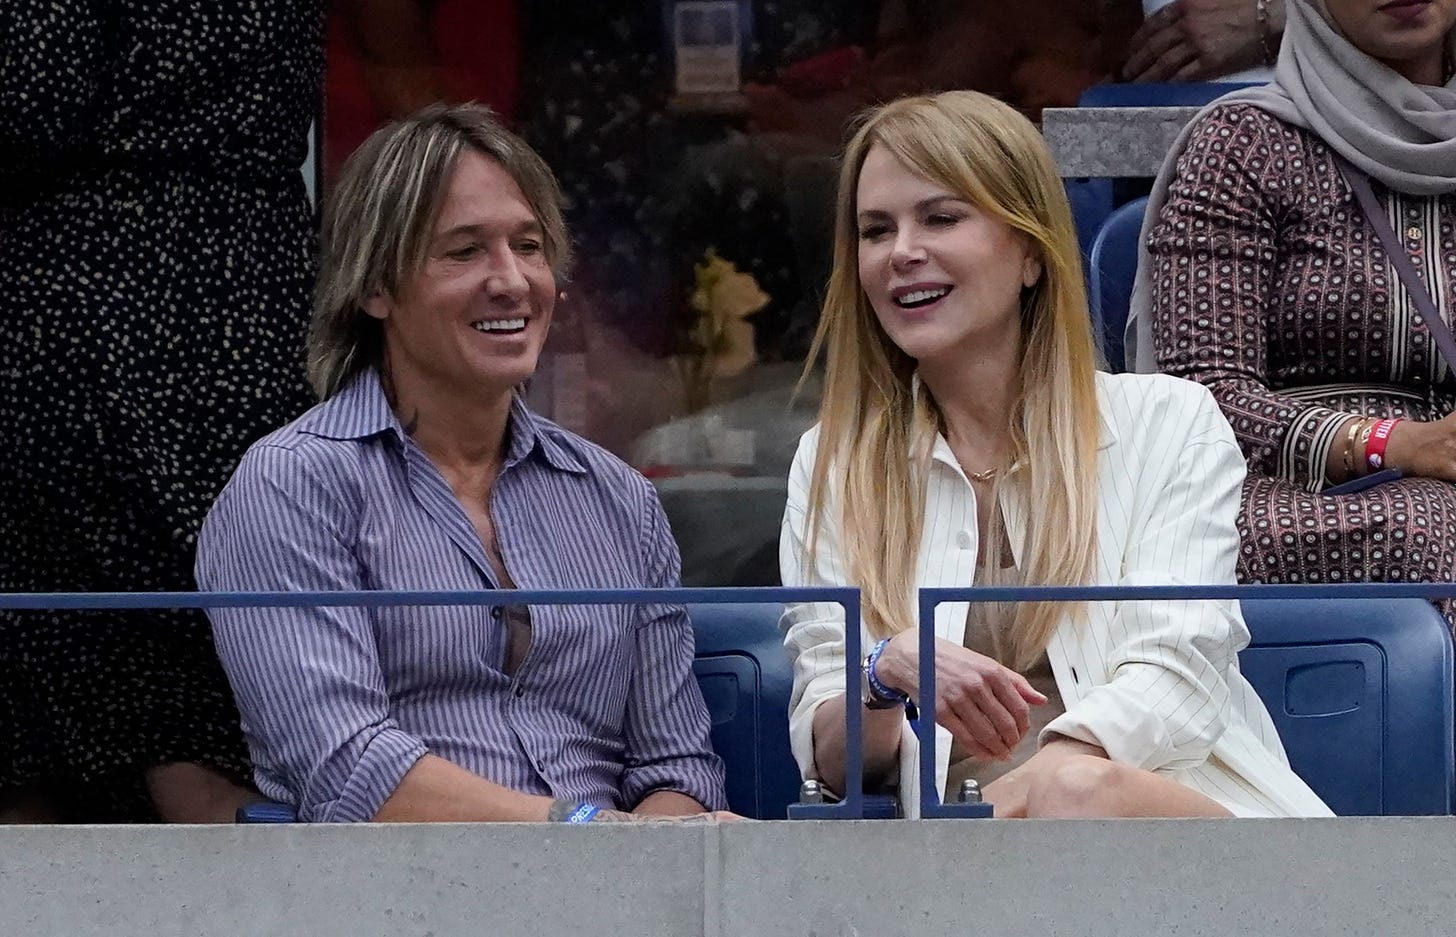 Kidman was at the match with singer-songwriter husband Keith Urban